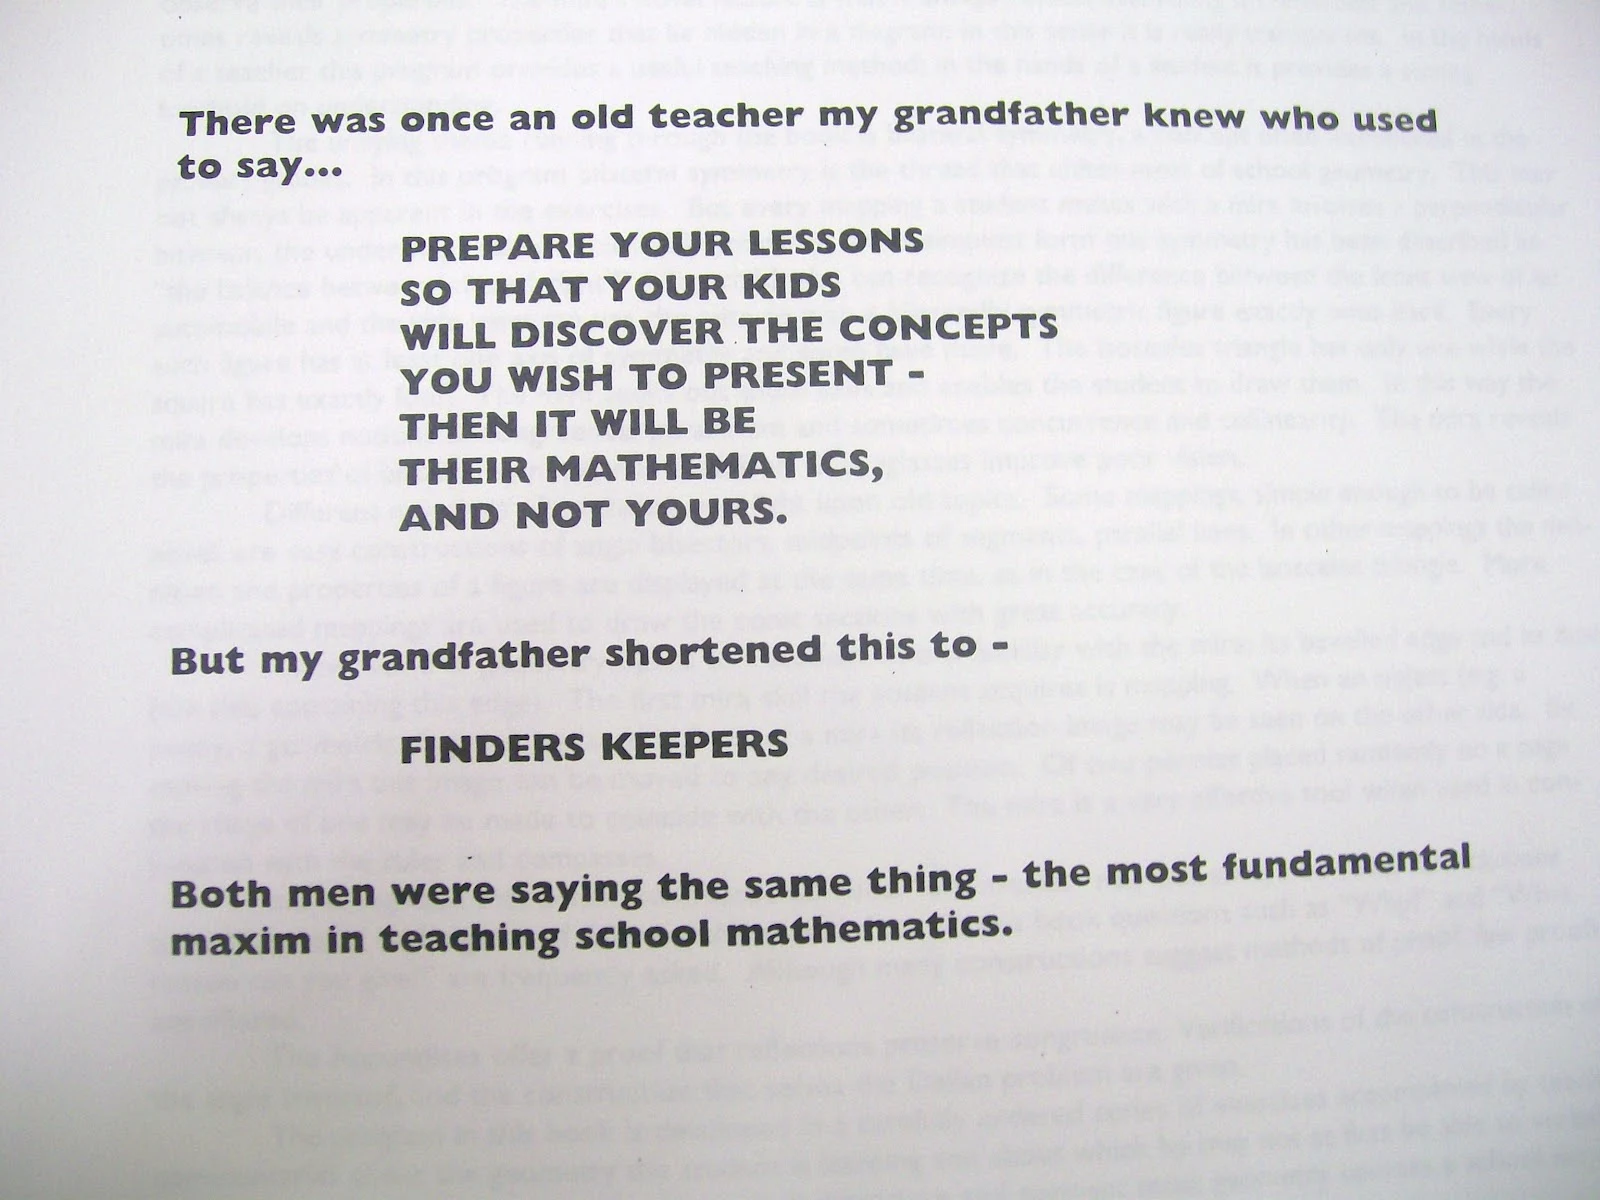 Quote: "there was once an old teacher my grandfather knew who used to say... prepare your lessons so that your kids will discover the concepts you wish to present - then it will be their mathematics, and not yours. But my grandfather shortened this to - FINDERS KEEPERS. Both men were saying the same thing - the most fundamental maxim in teaching school mathematics." 